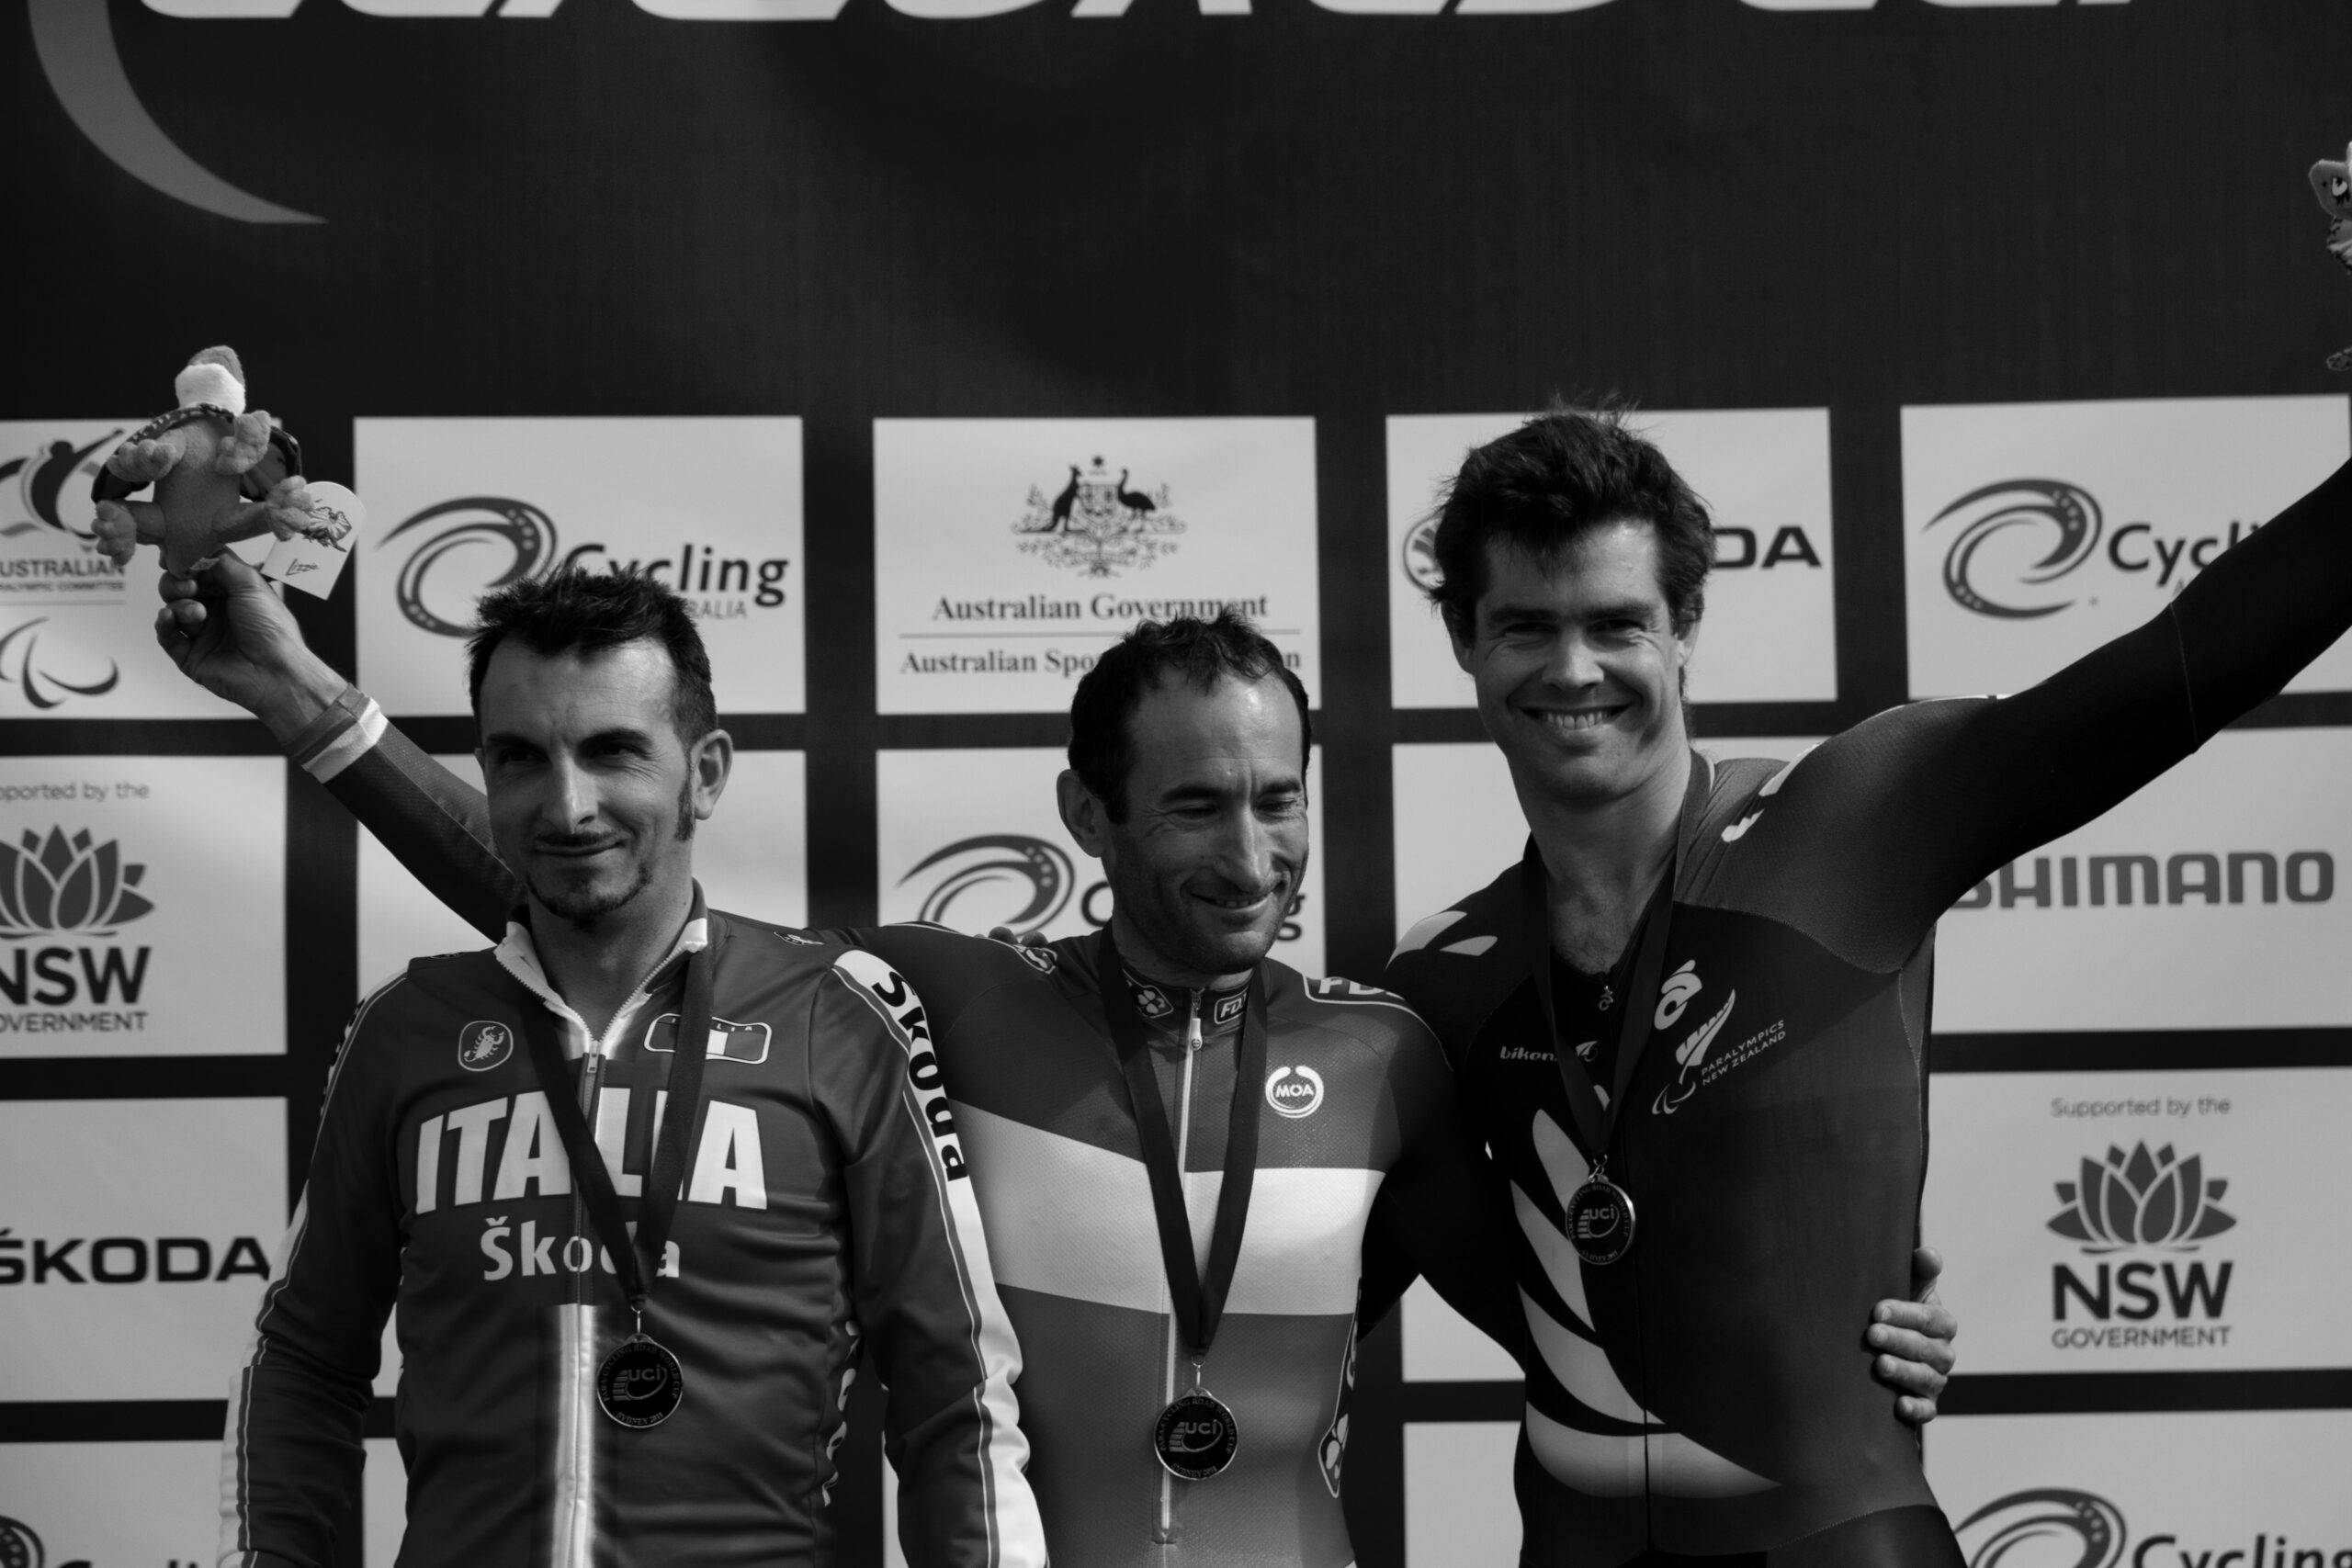 Three men cyclists wave from the podium